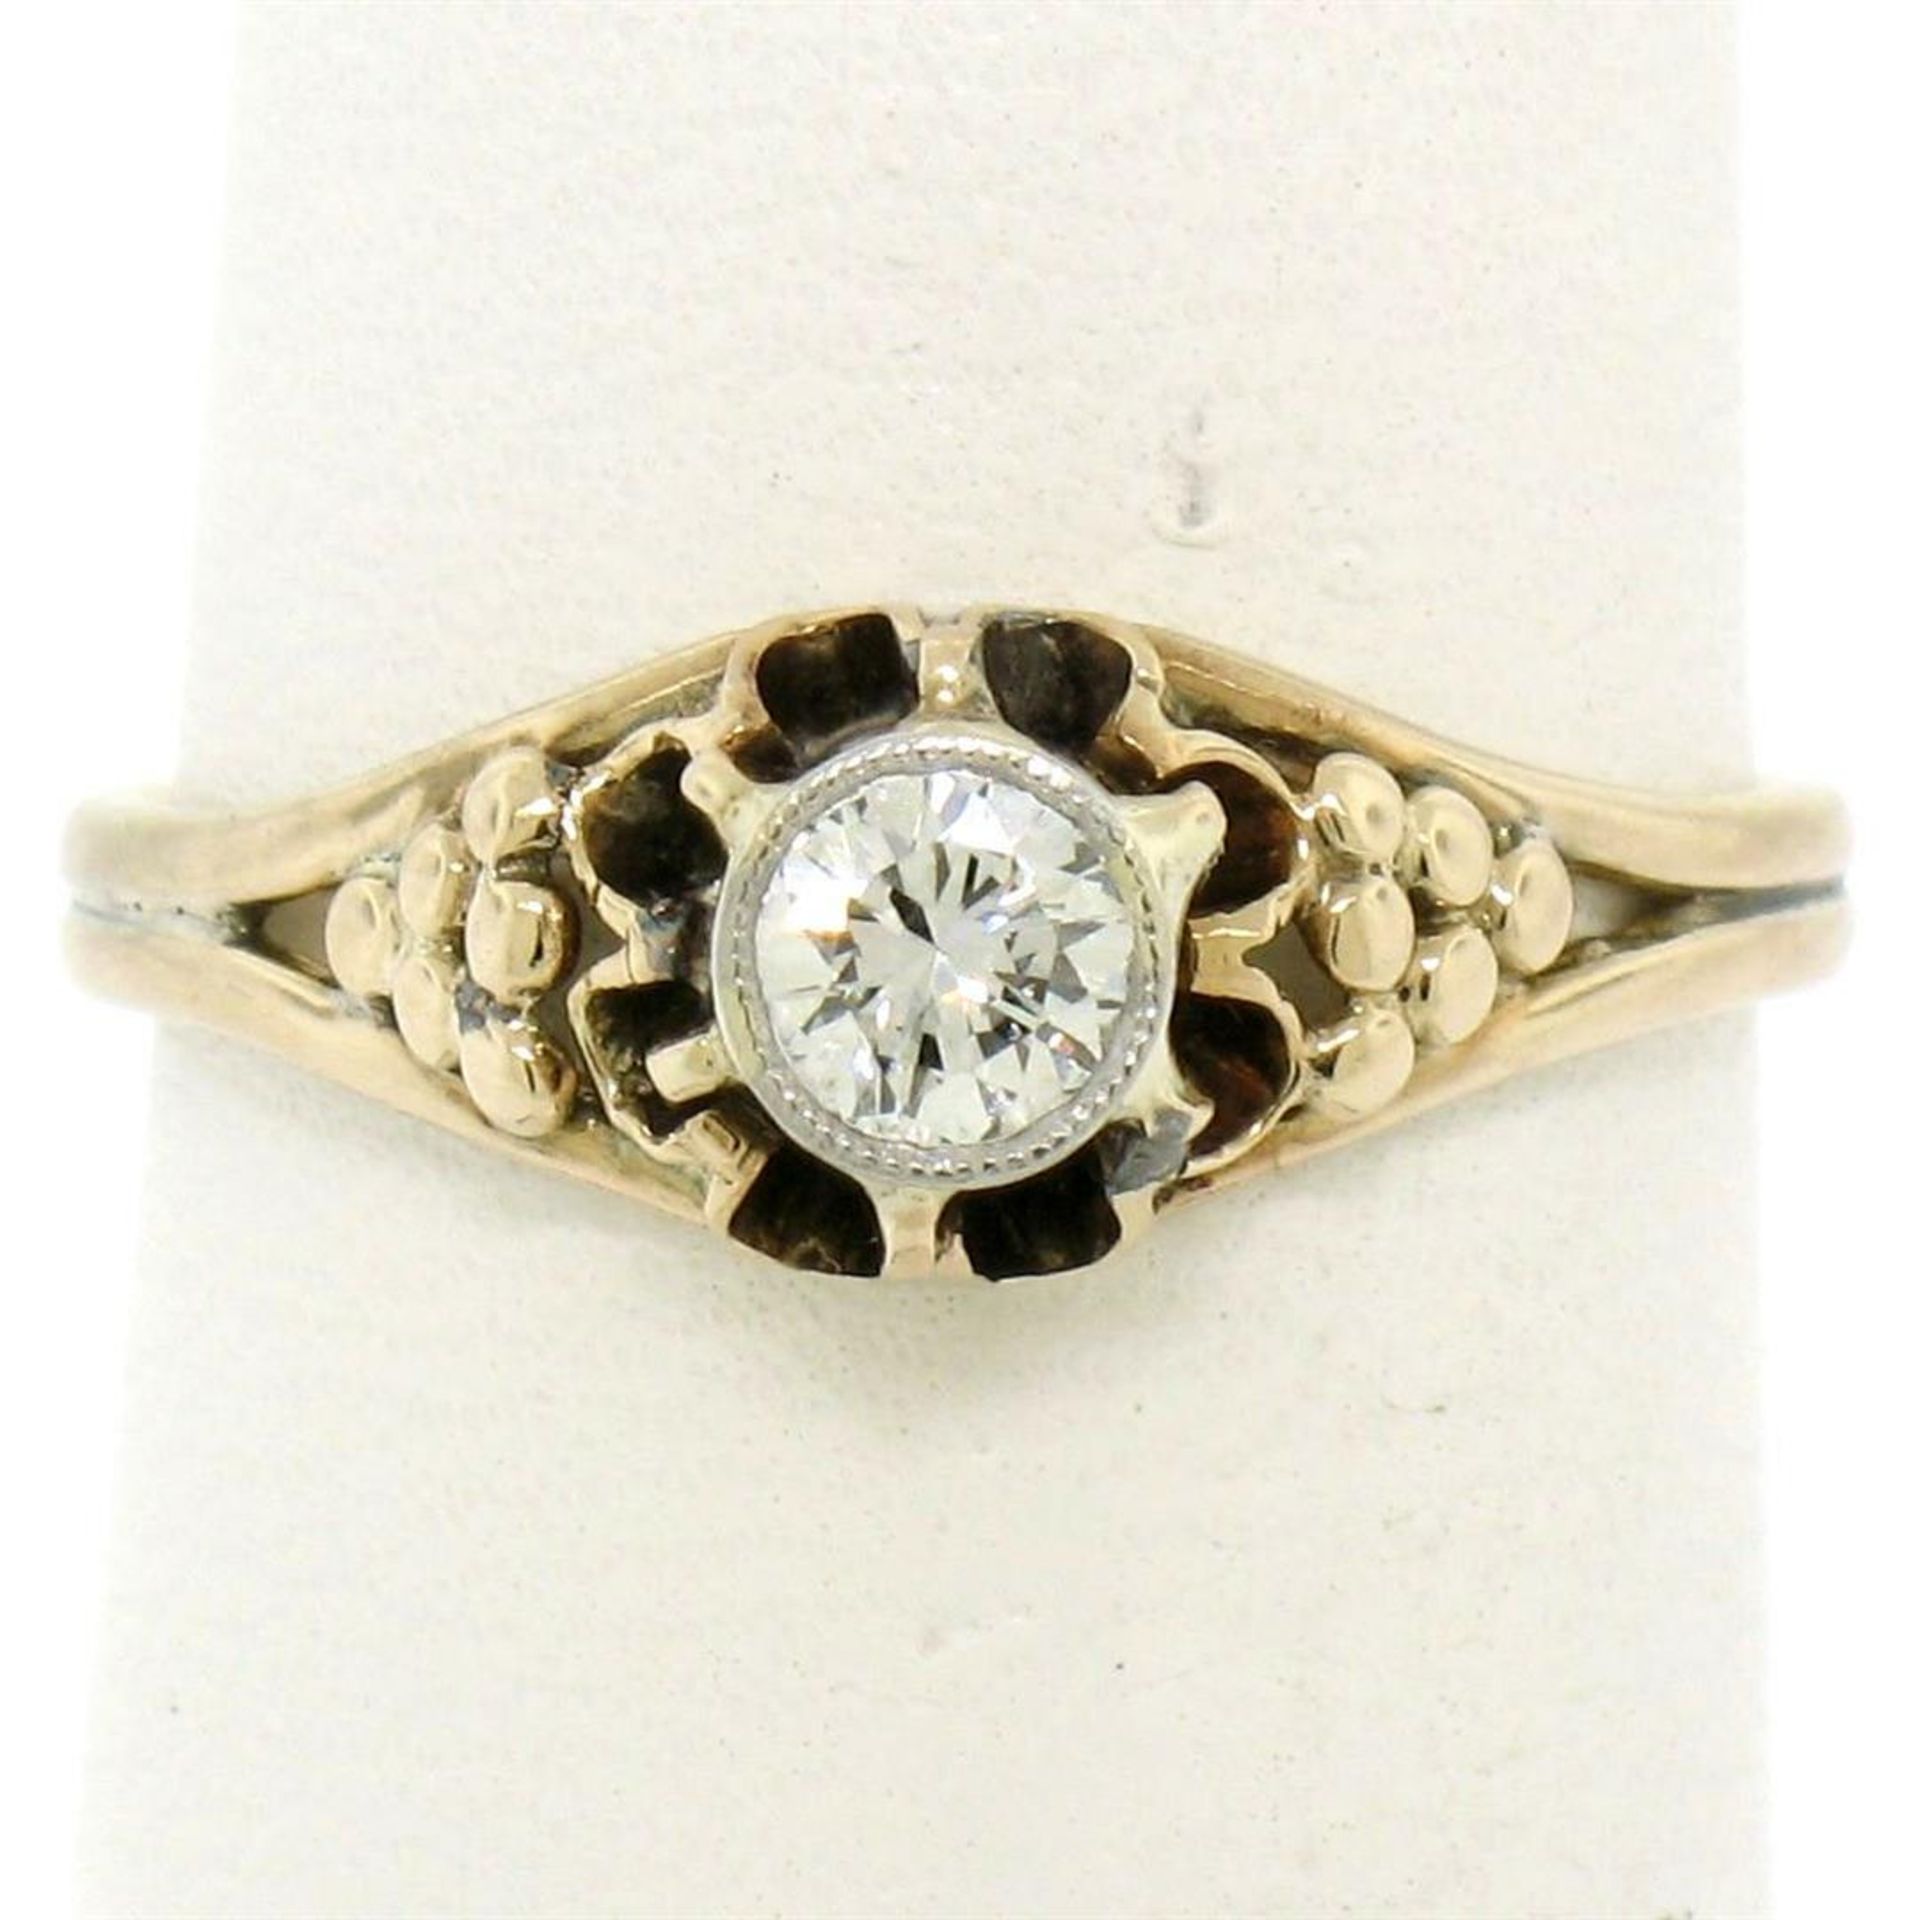 Antique 14kt Yellow and White Gold 0.30 ct Diamond Solitaire Ring - Image 3 of 8